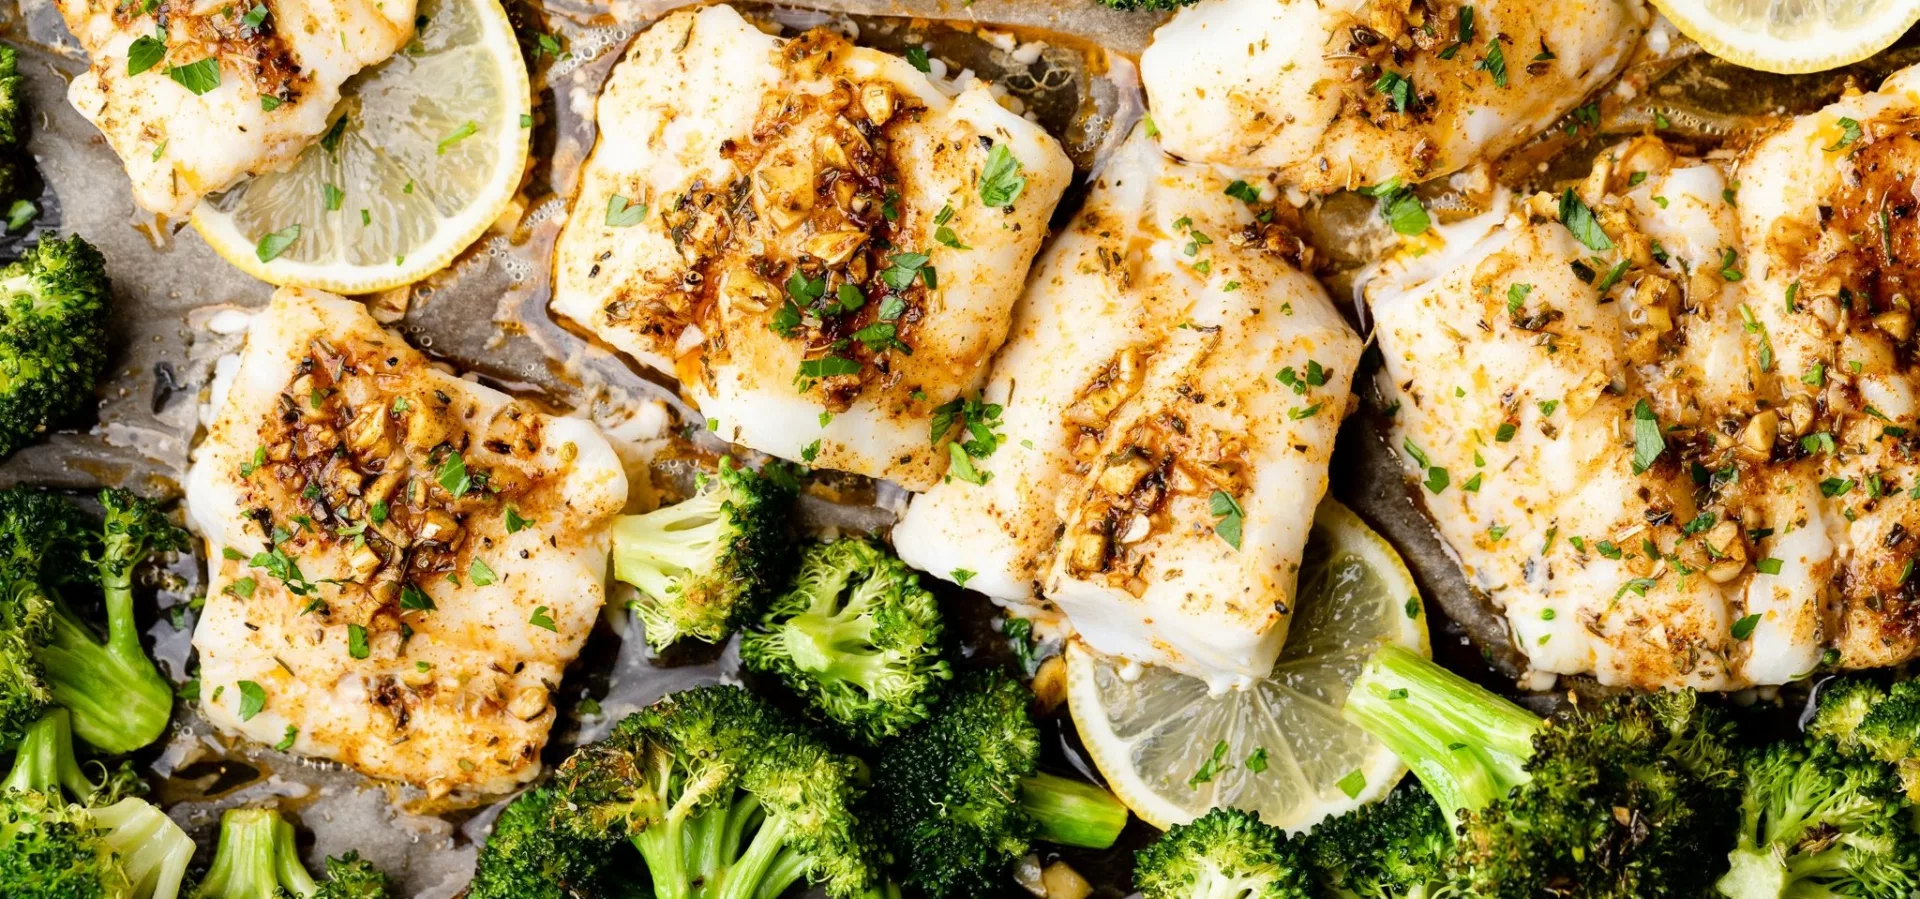 Baked Cod with Lemon Butter Sauce and Steamed Broccoli 2